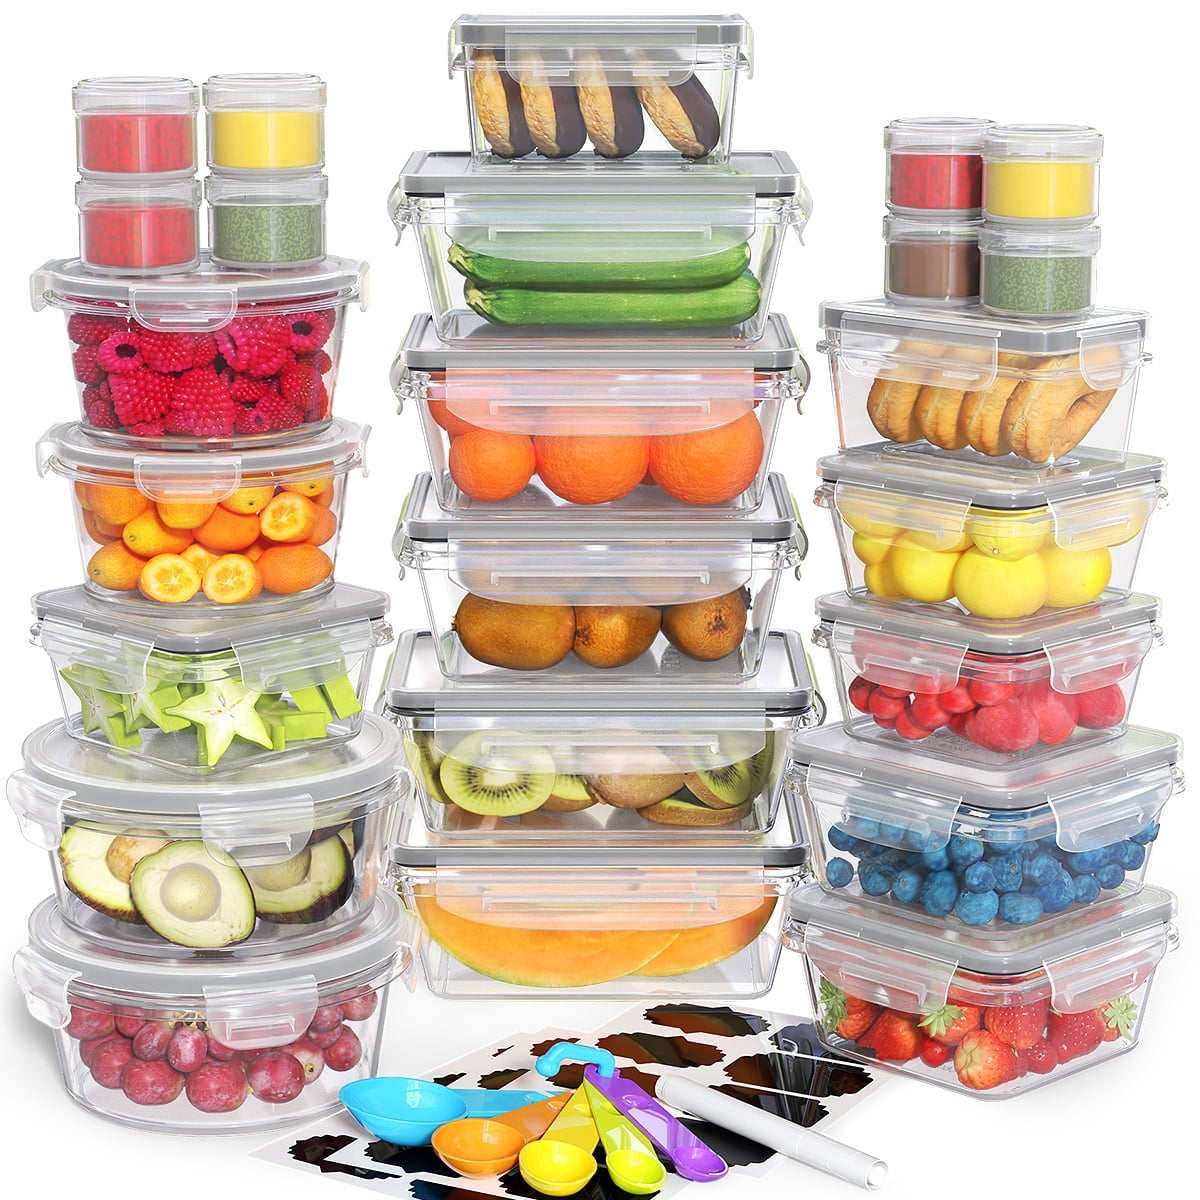 Volarium Small Glass Storage Containers with Lids, Stackable Bowls, Set of 4 with Multi-Colored BPA Free Lids for Cooking Prep, Sauce